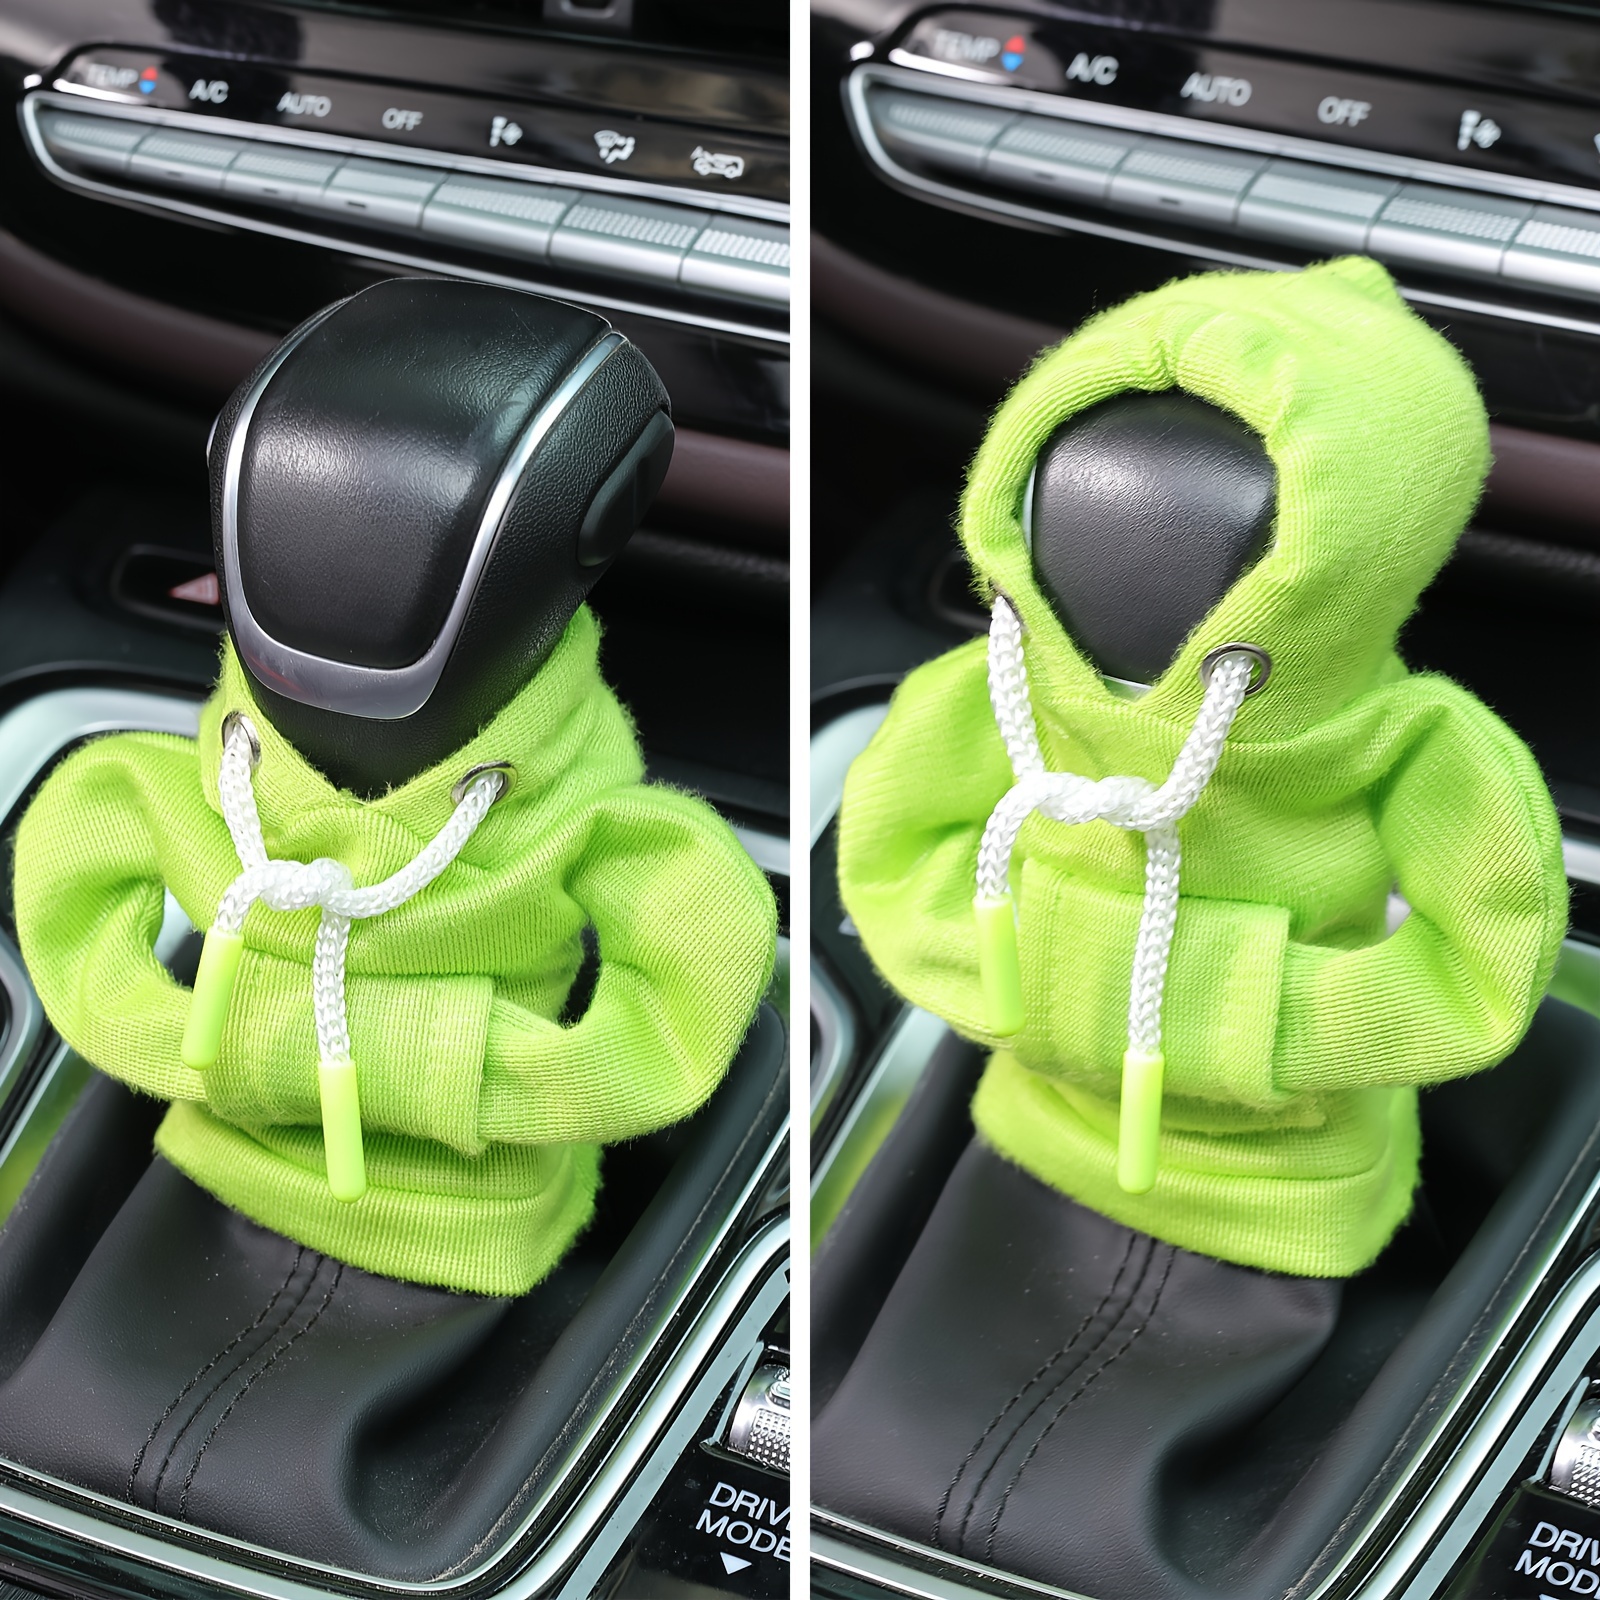  ADYERBY Hoodie Gear Shift Cover, Car Gear Shift Cover Hoodie,  Mini Hoodie for Car Shifter, Automotive Interior Accessories, Shift Knobs  Fashionable Hooded Shirt Car (Yellow/Black) : Automotive